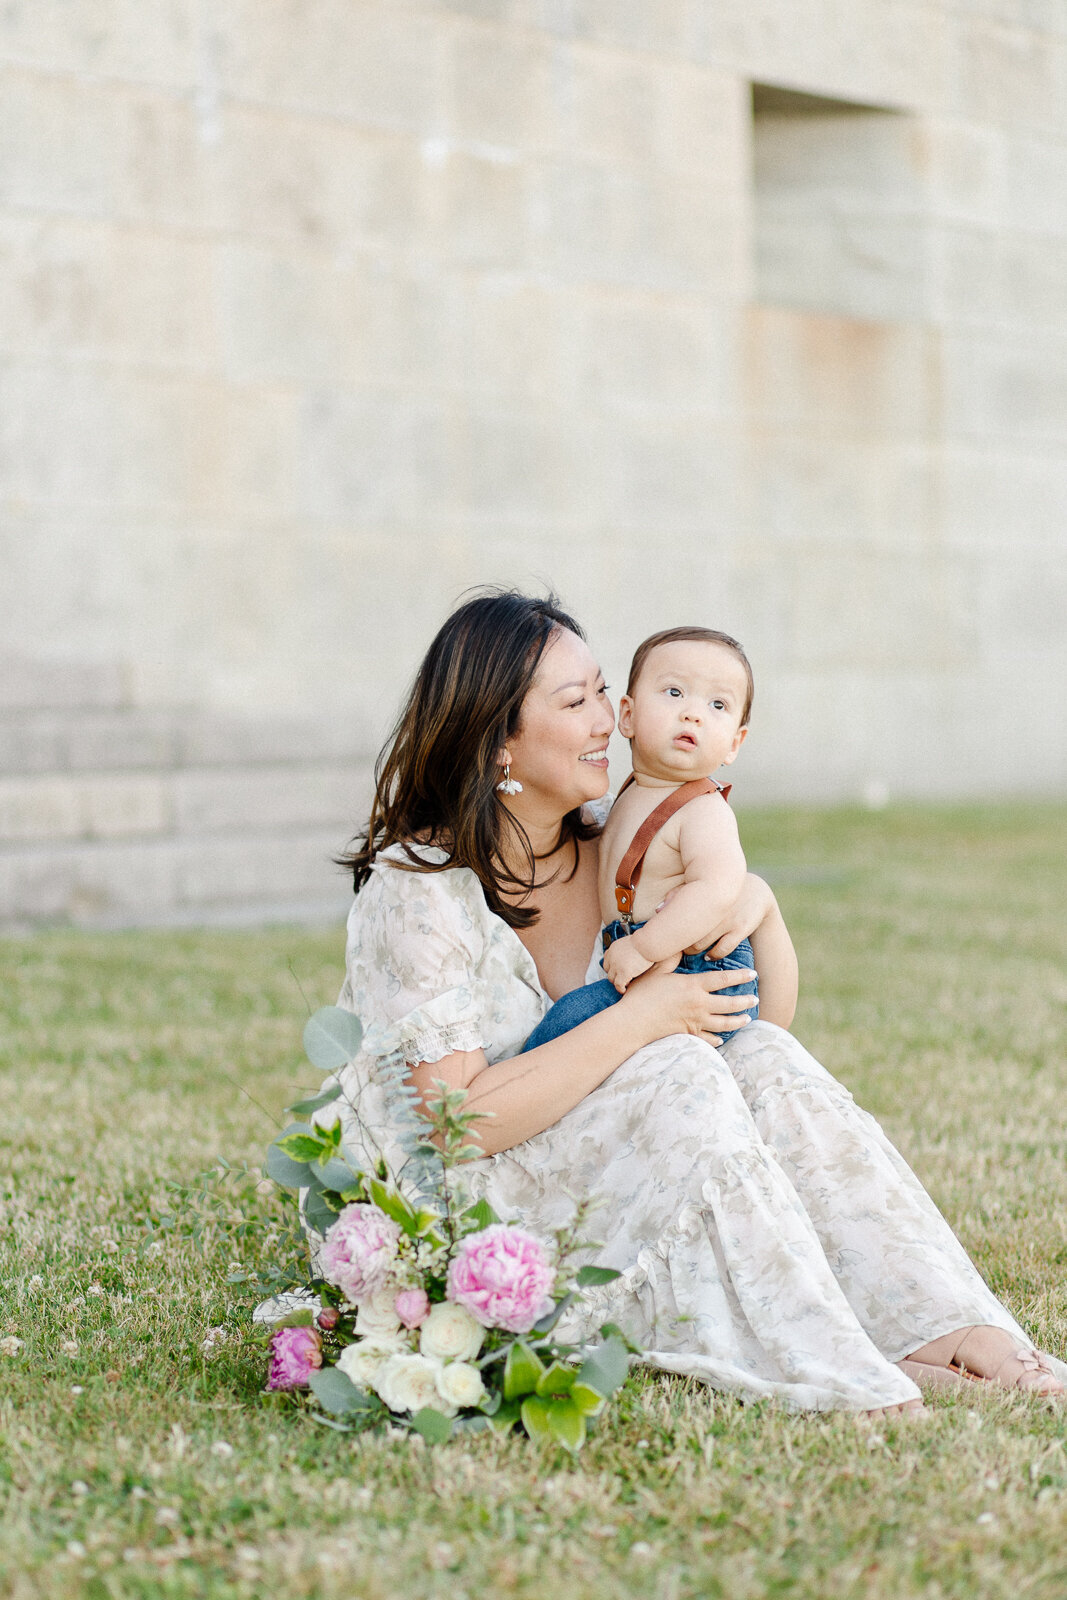 A mother wearing a floral gown sitting on the grass with a floral arrangement placed in front of them,  holds her baby boy during photo session with Boston photographer Corinne Isabelle